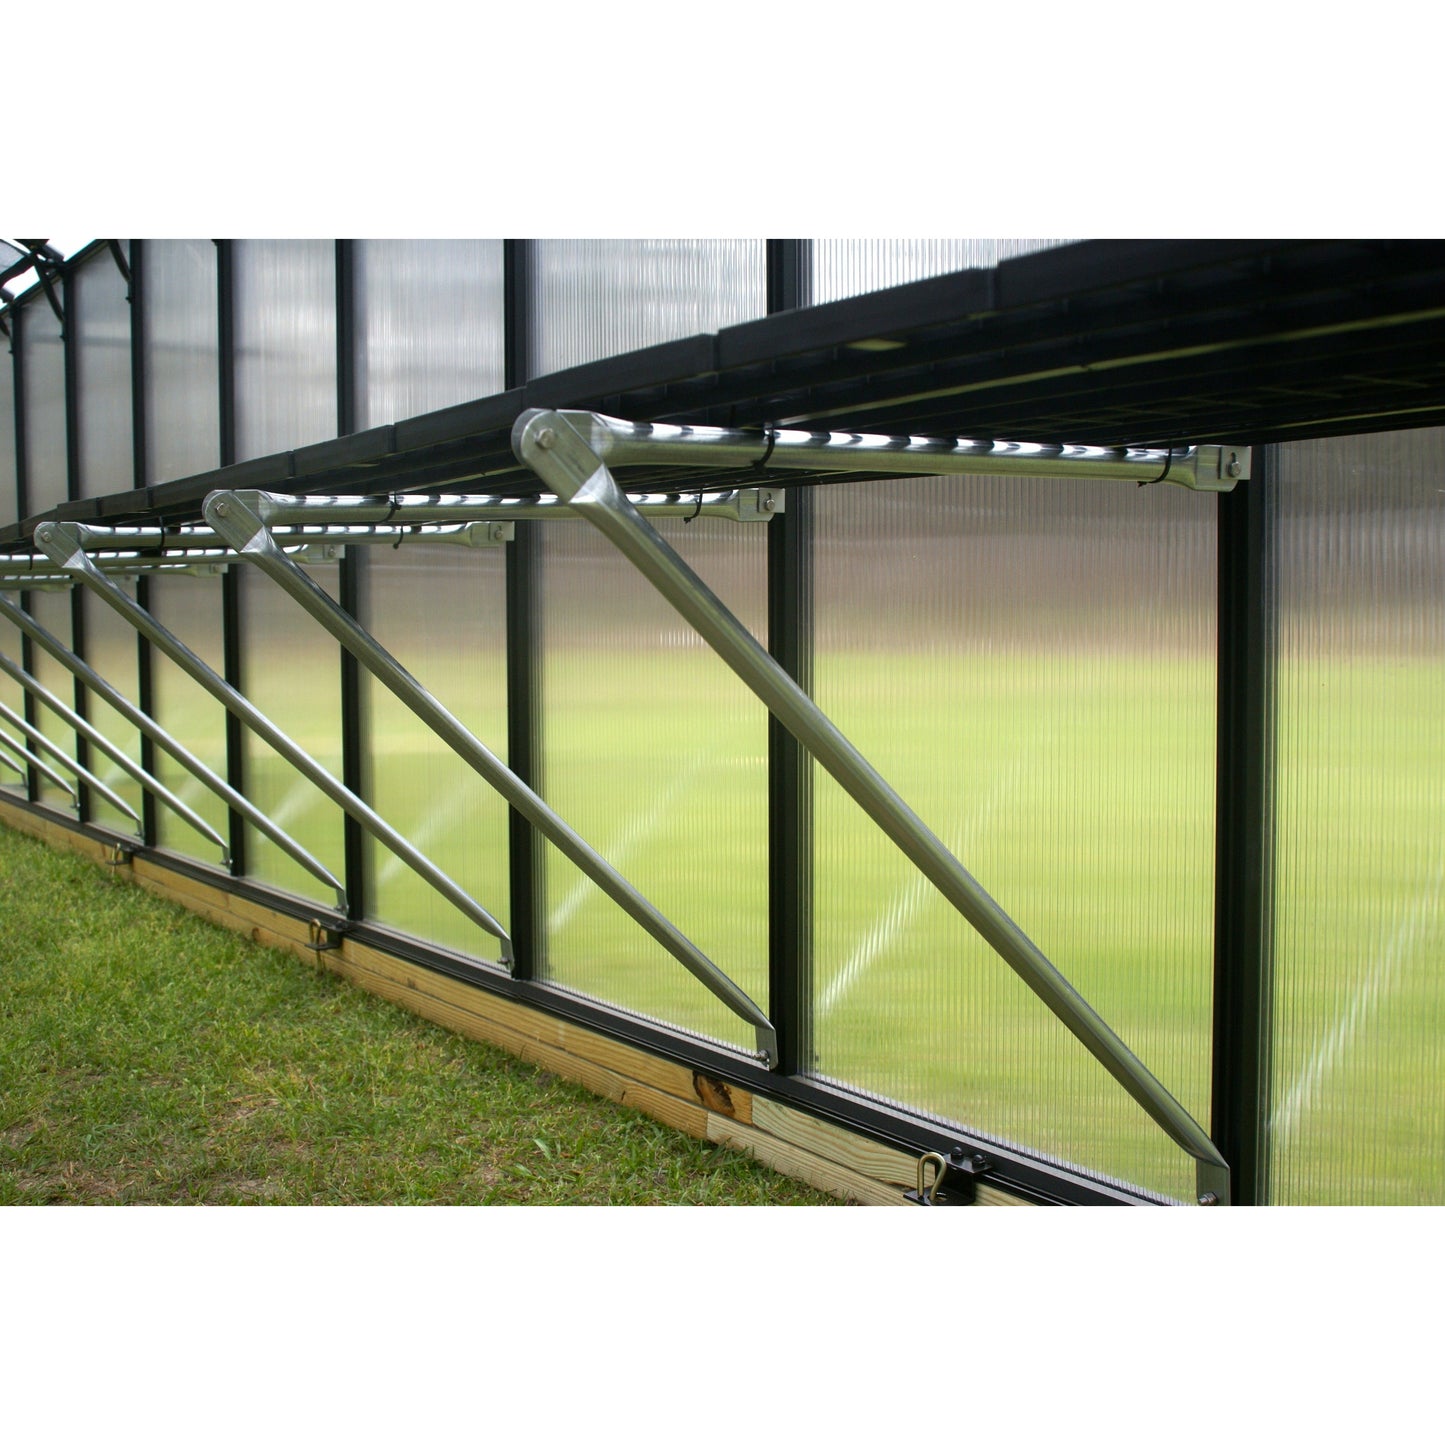 Mont Growers Edition Greenhouse 8FTx 12FT - Black Finish MONT-12-BK-GROWERS